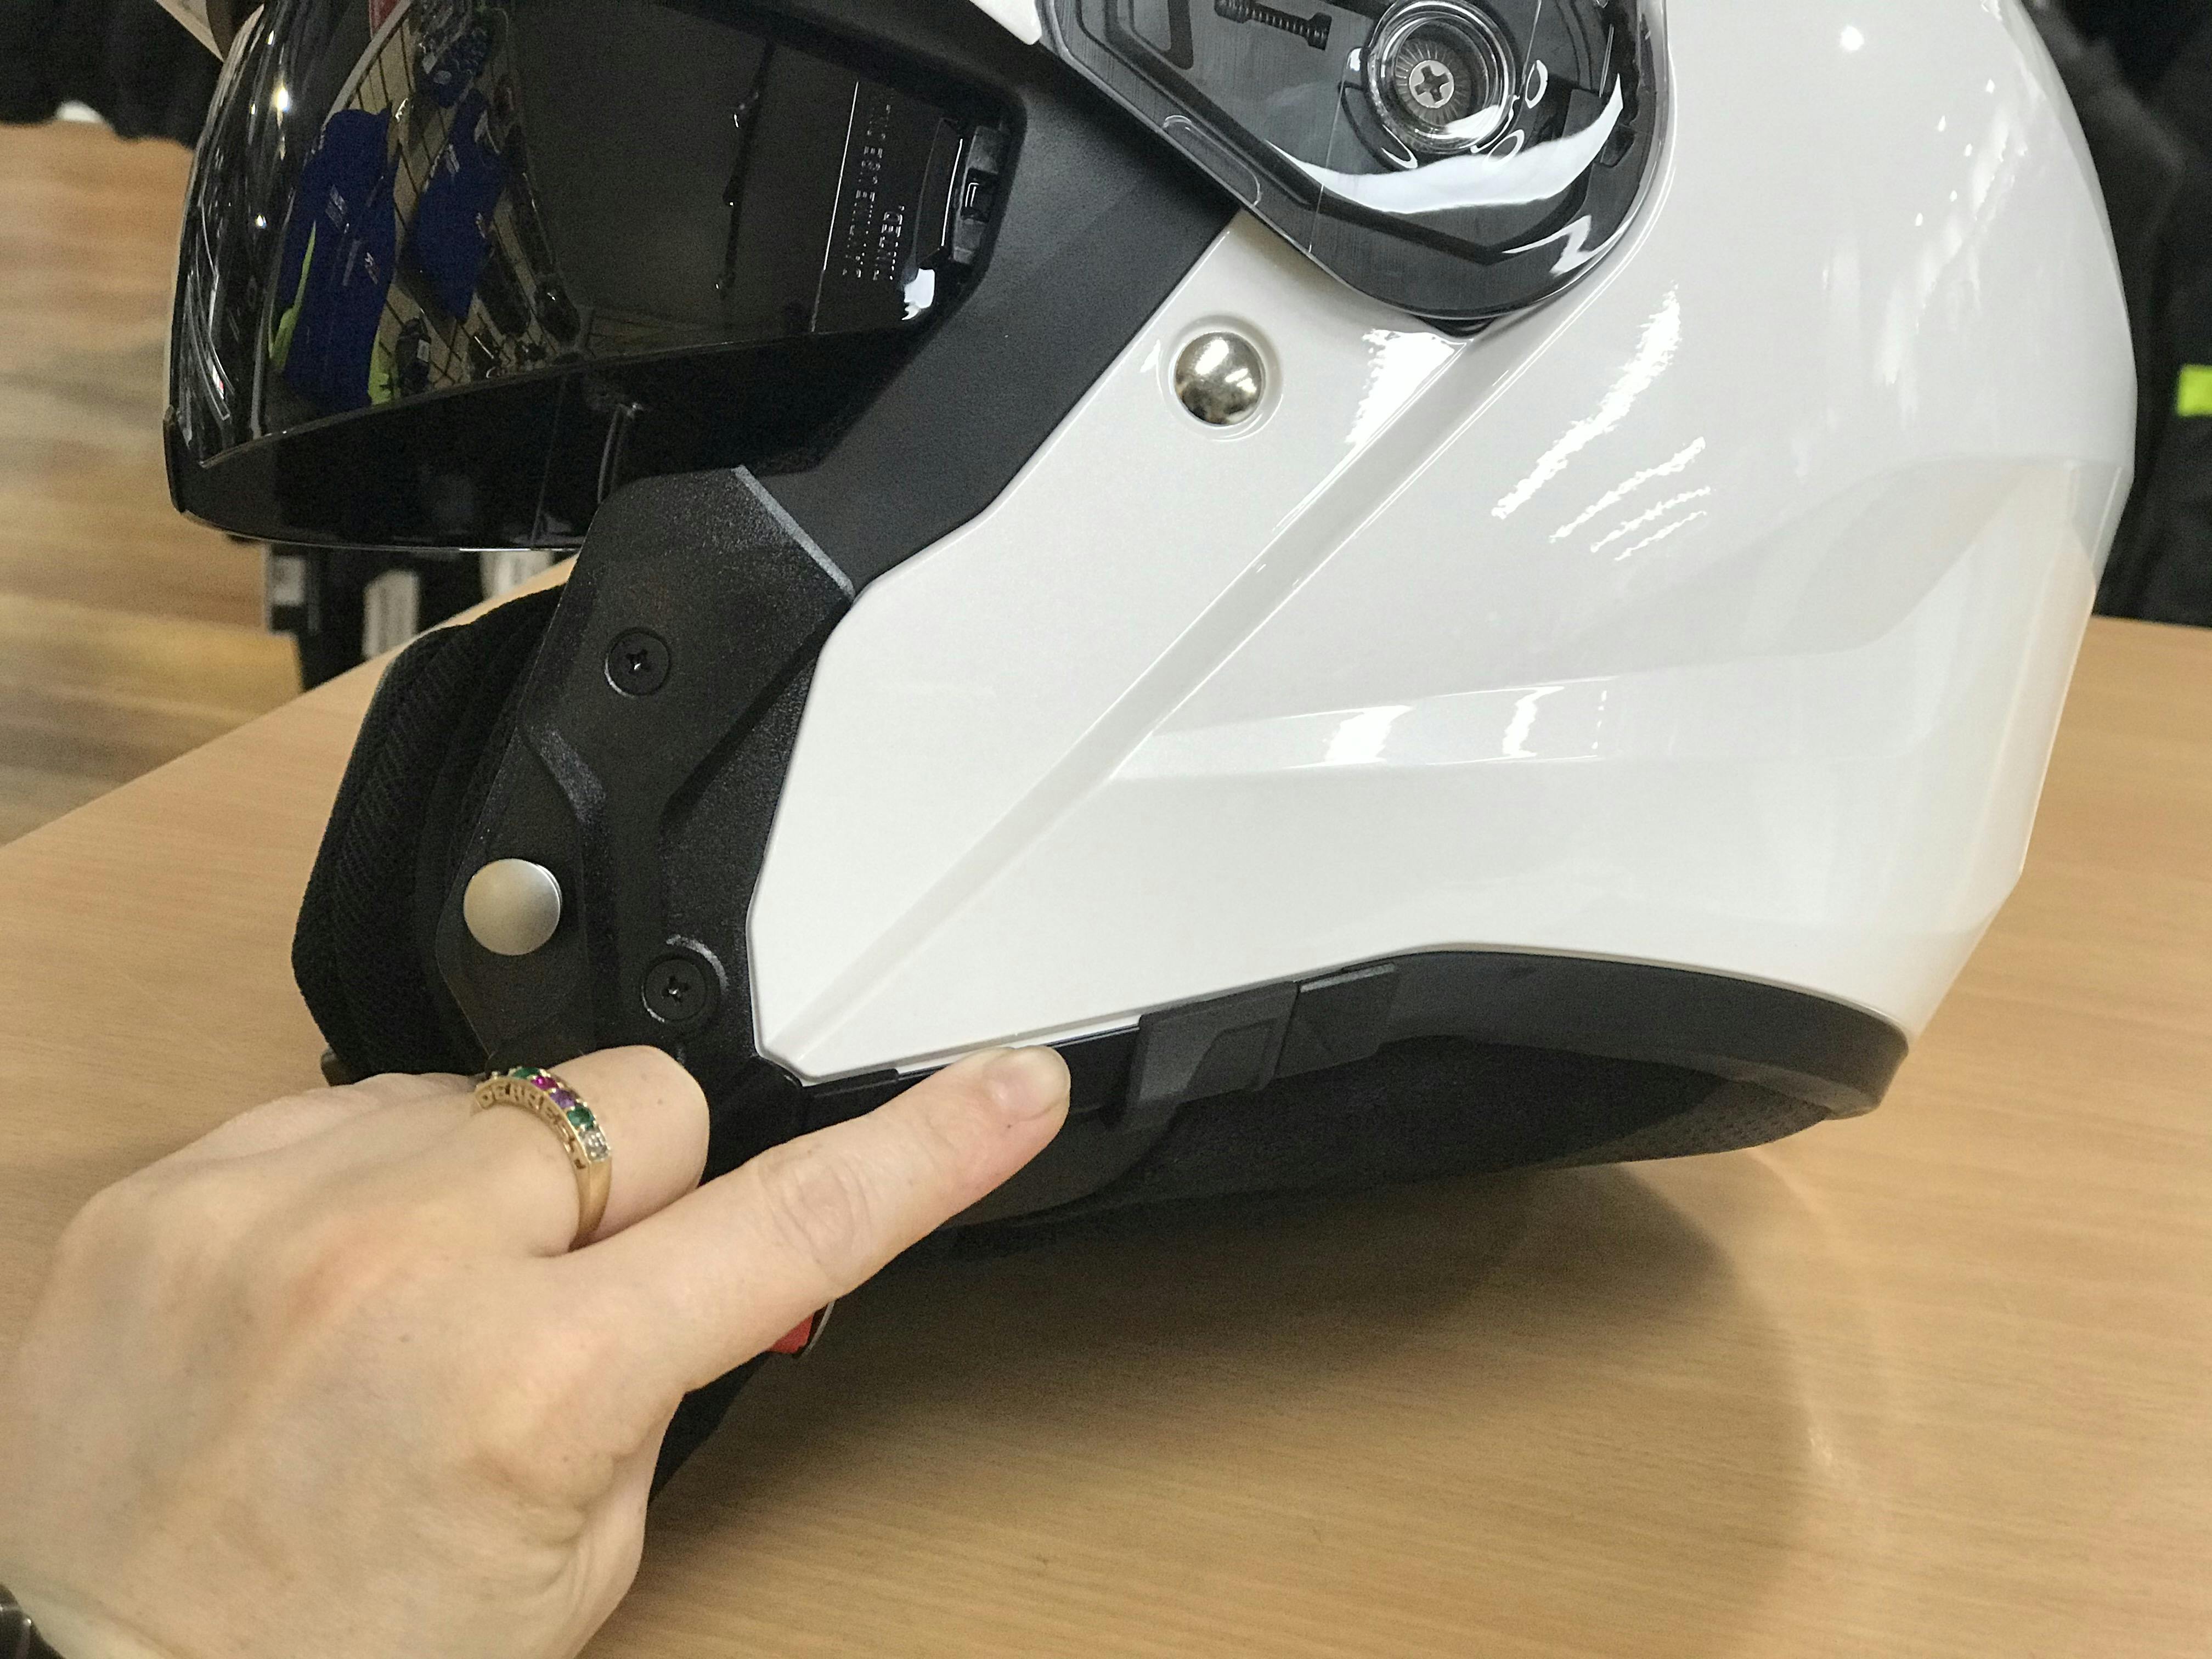 i90 open - pointing to where the new internal visor mechanism is